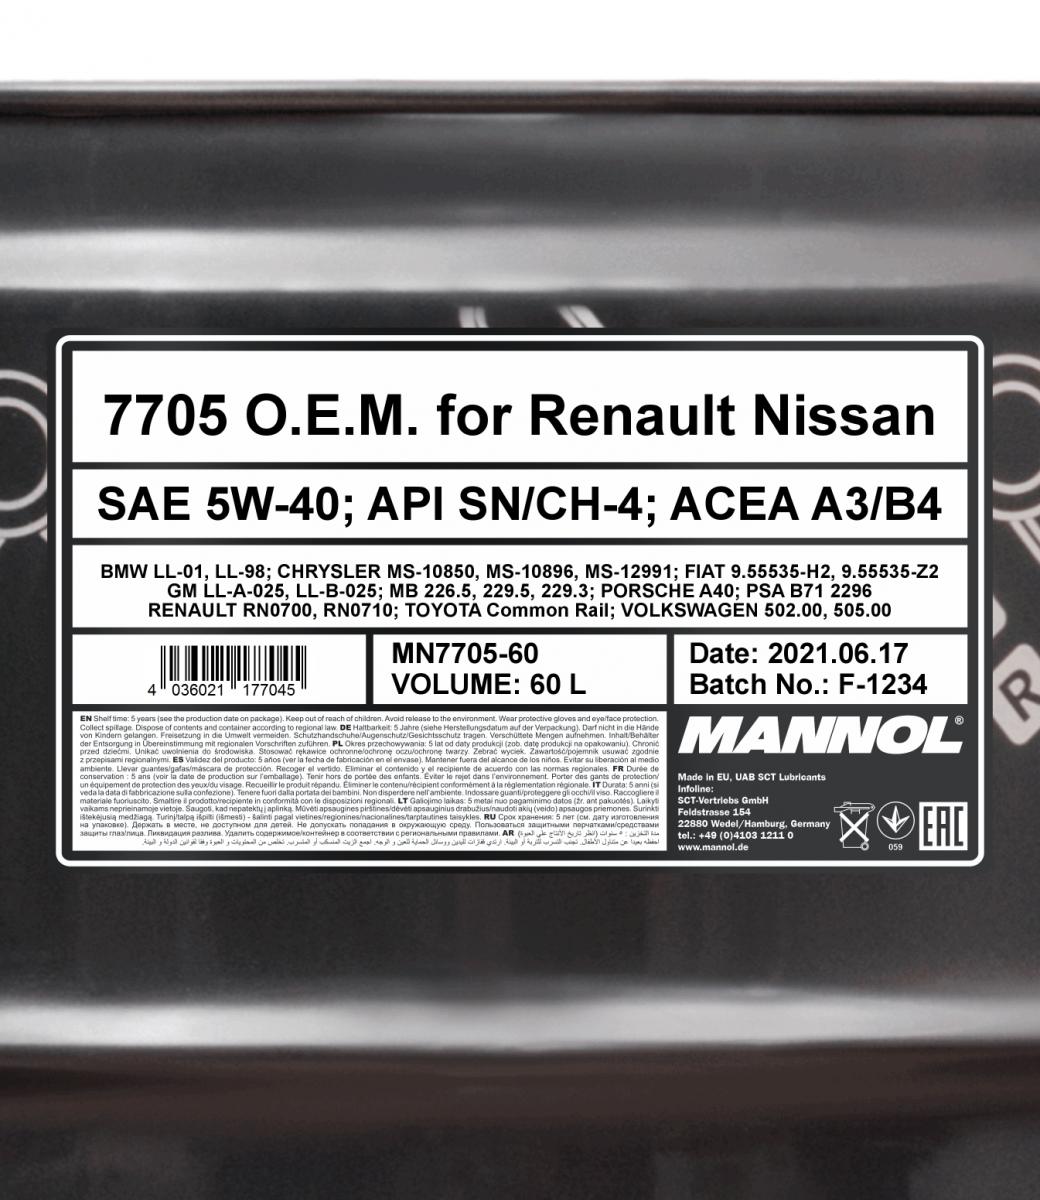 MANNOL GERMANY Oem For Renault Nissan Fully Synthetic Sae 5W-40 7705  Metallic 1L - buy MANNOL GERMANY Oem For Renault Nissan Fully Synthetic Sae  5W-40 7705 Metallic 1L: prices, reviews